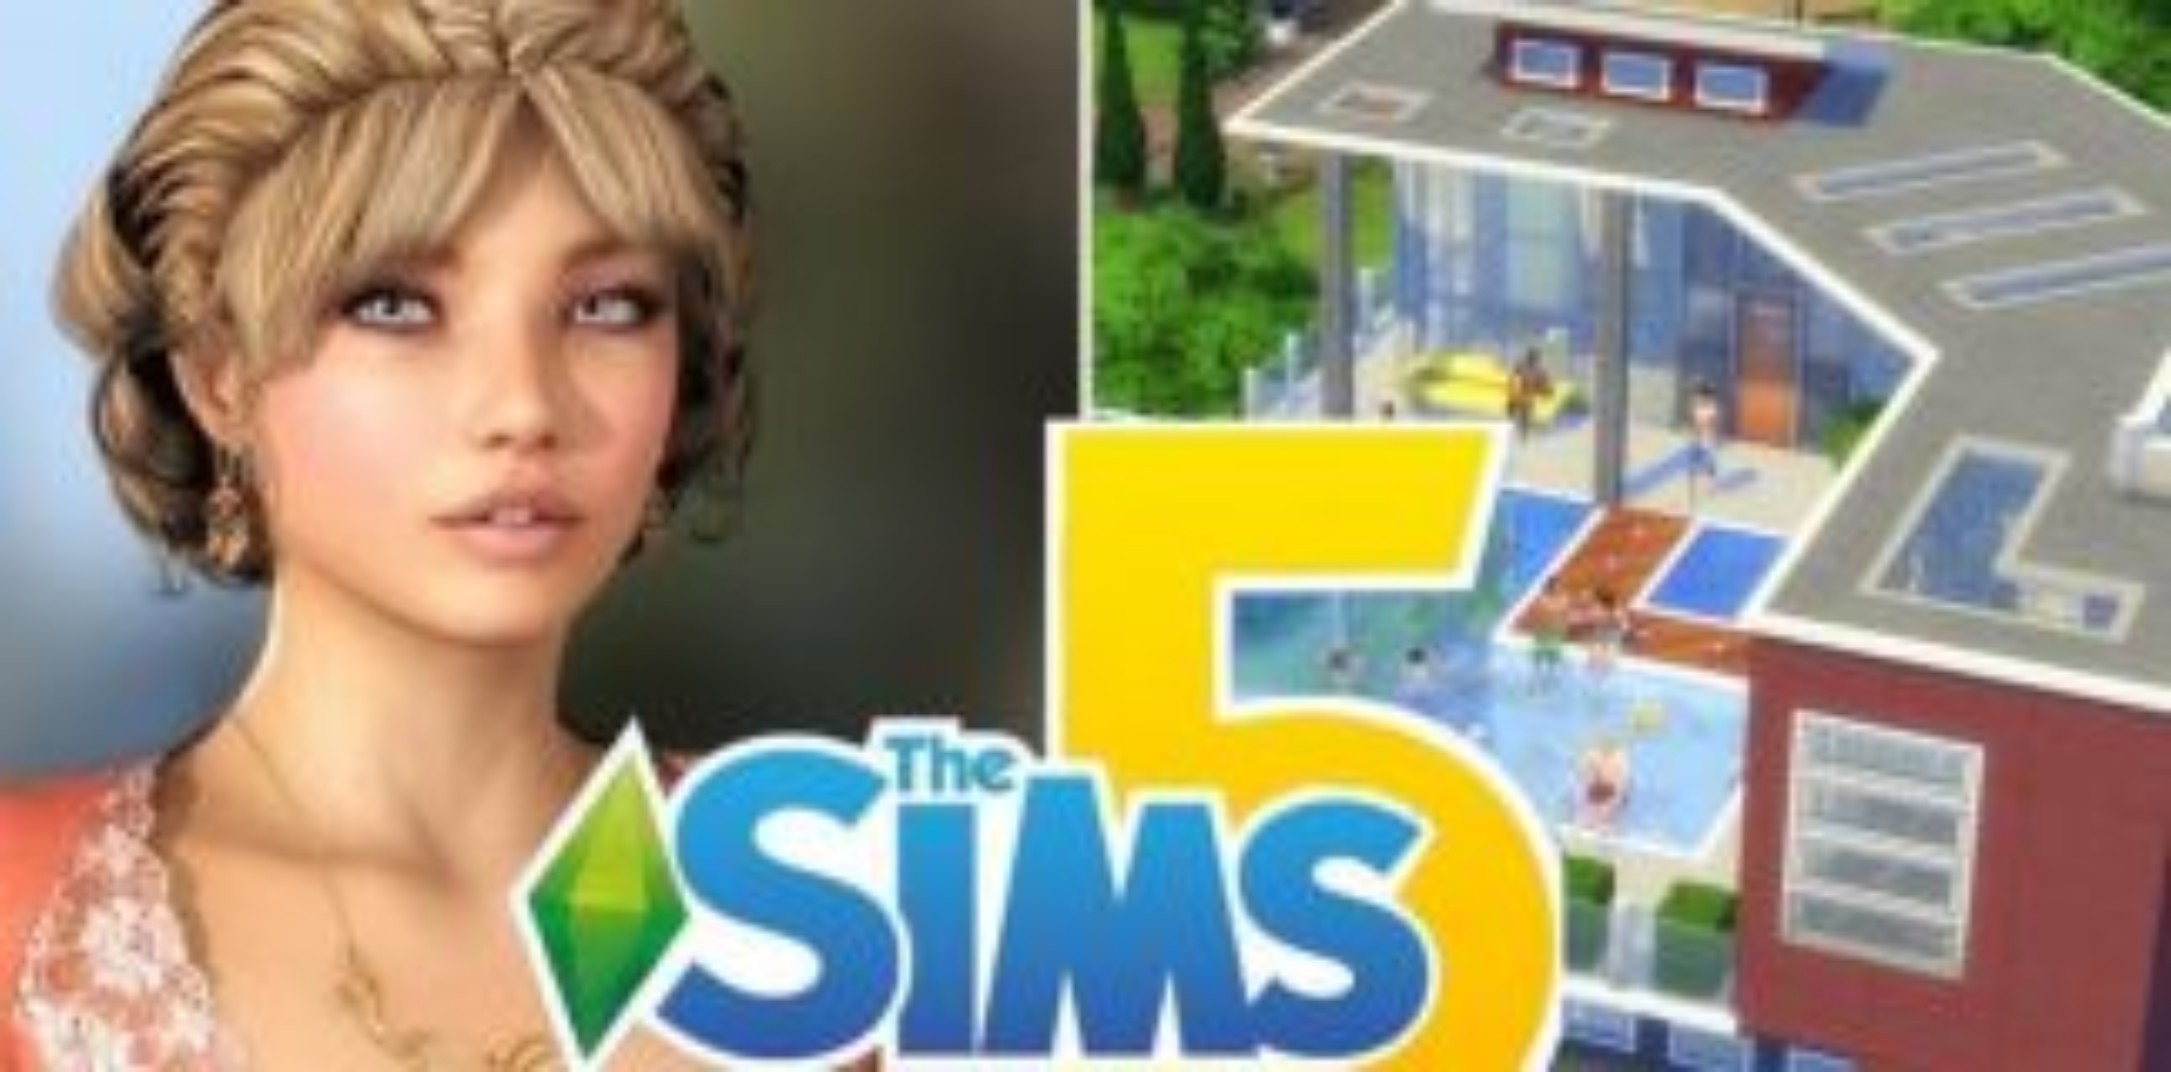 cc cheats for the sims 4 free